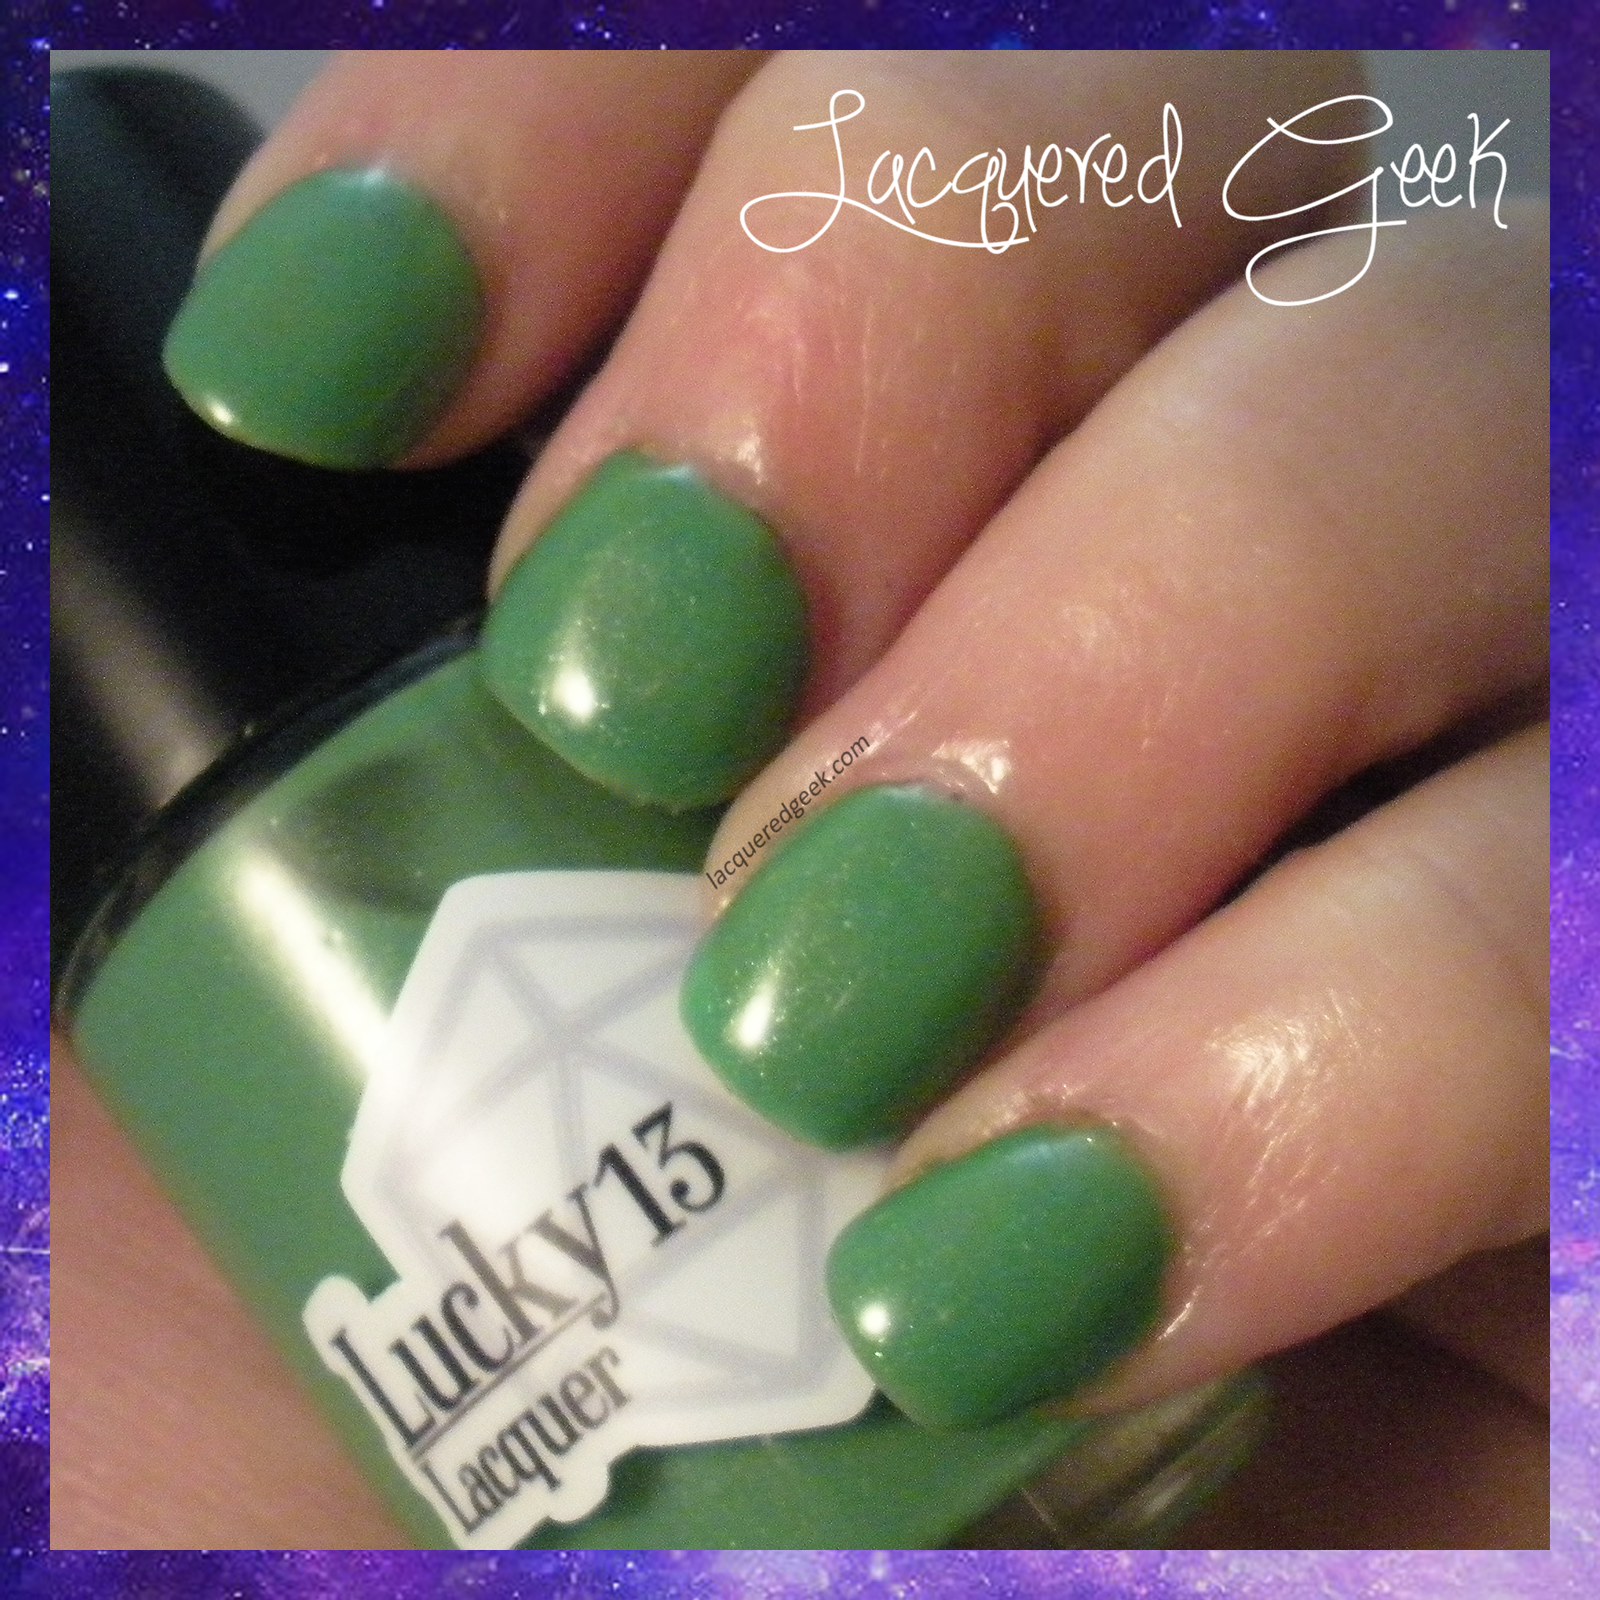 lucky 13 lacquer bad witch swatch